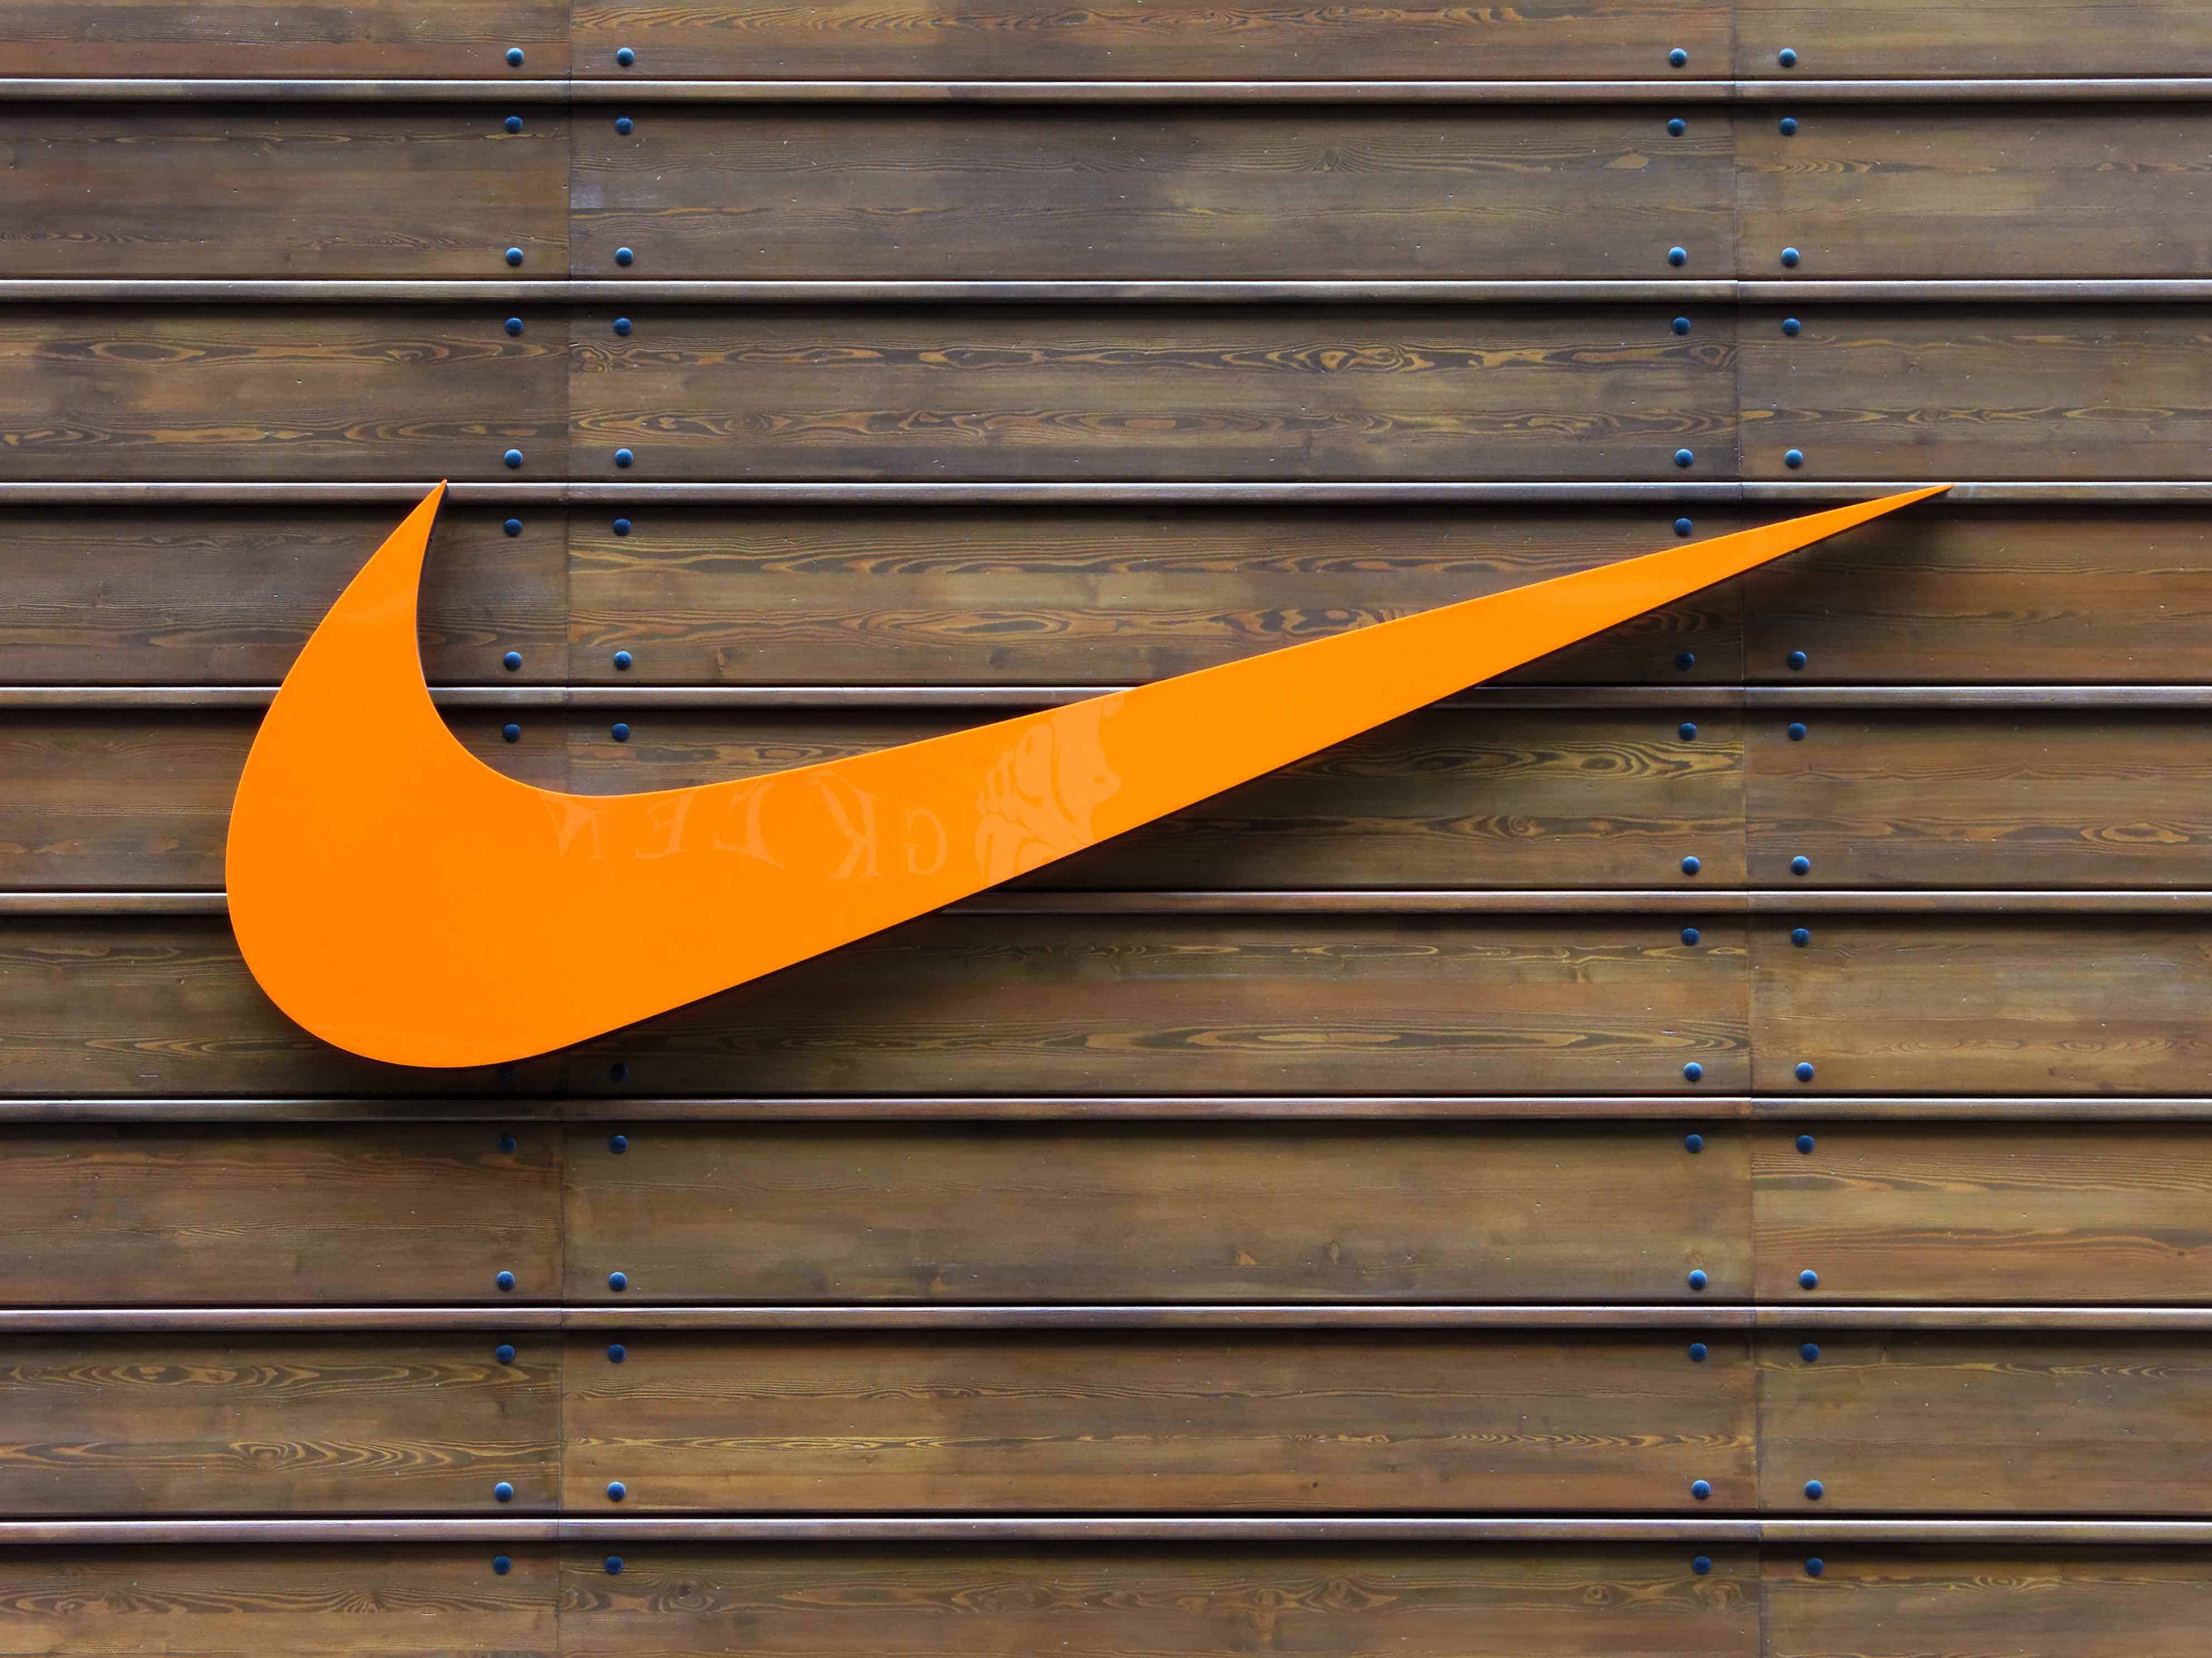 50 Facts About Nike: Famous Company in the World - Facts.net